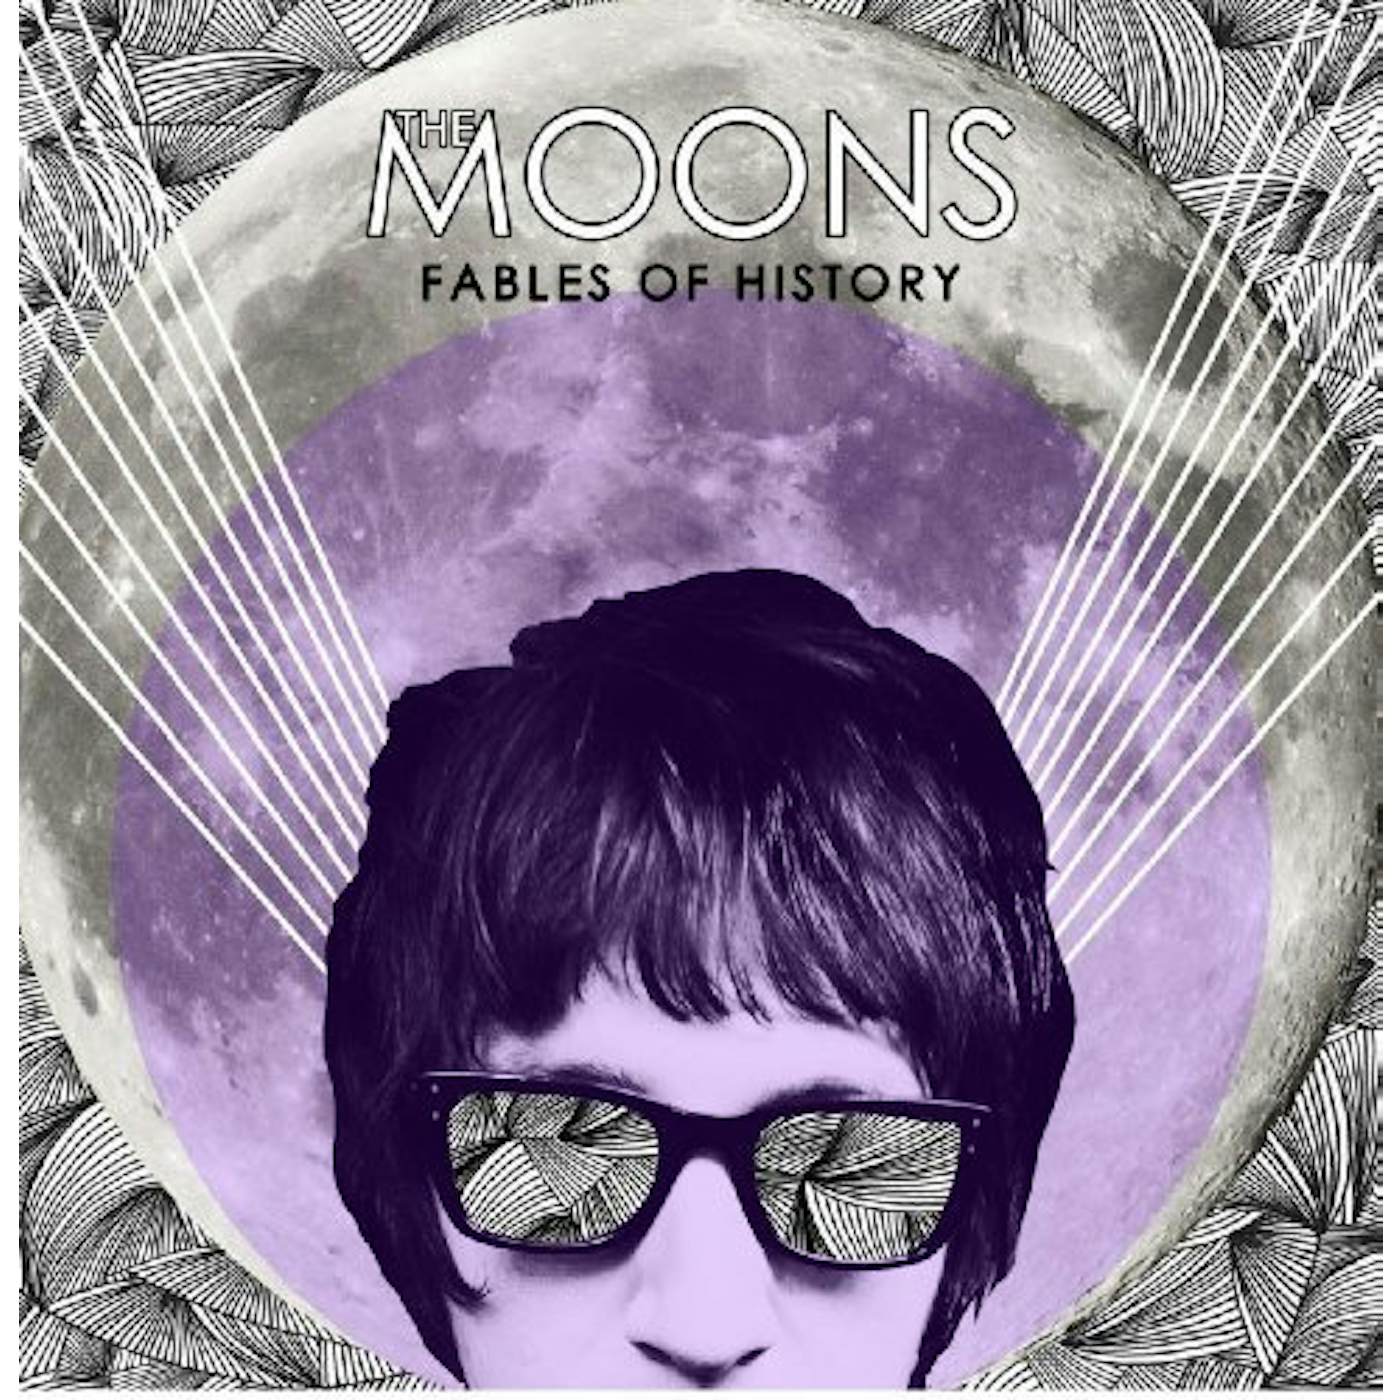 The Moons FABLES OF HISTORY (Vinyl)